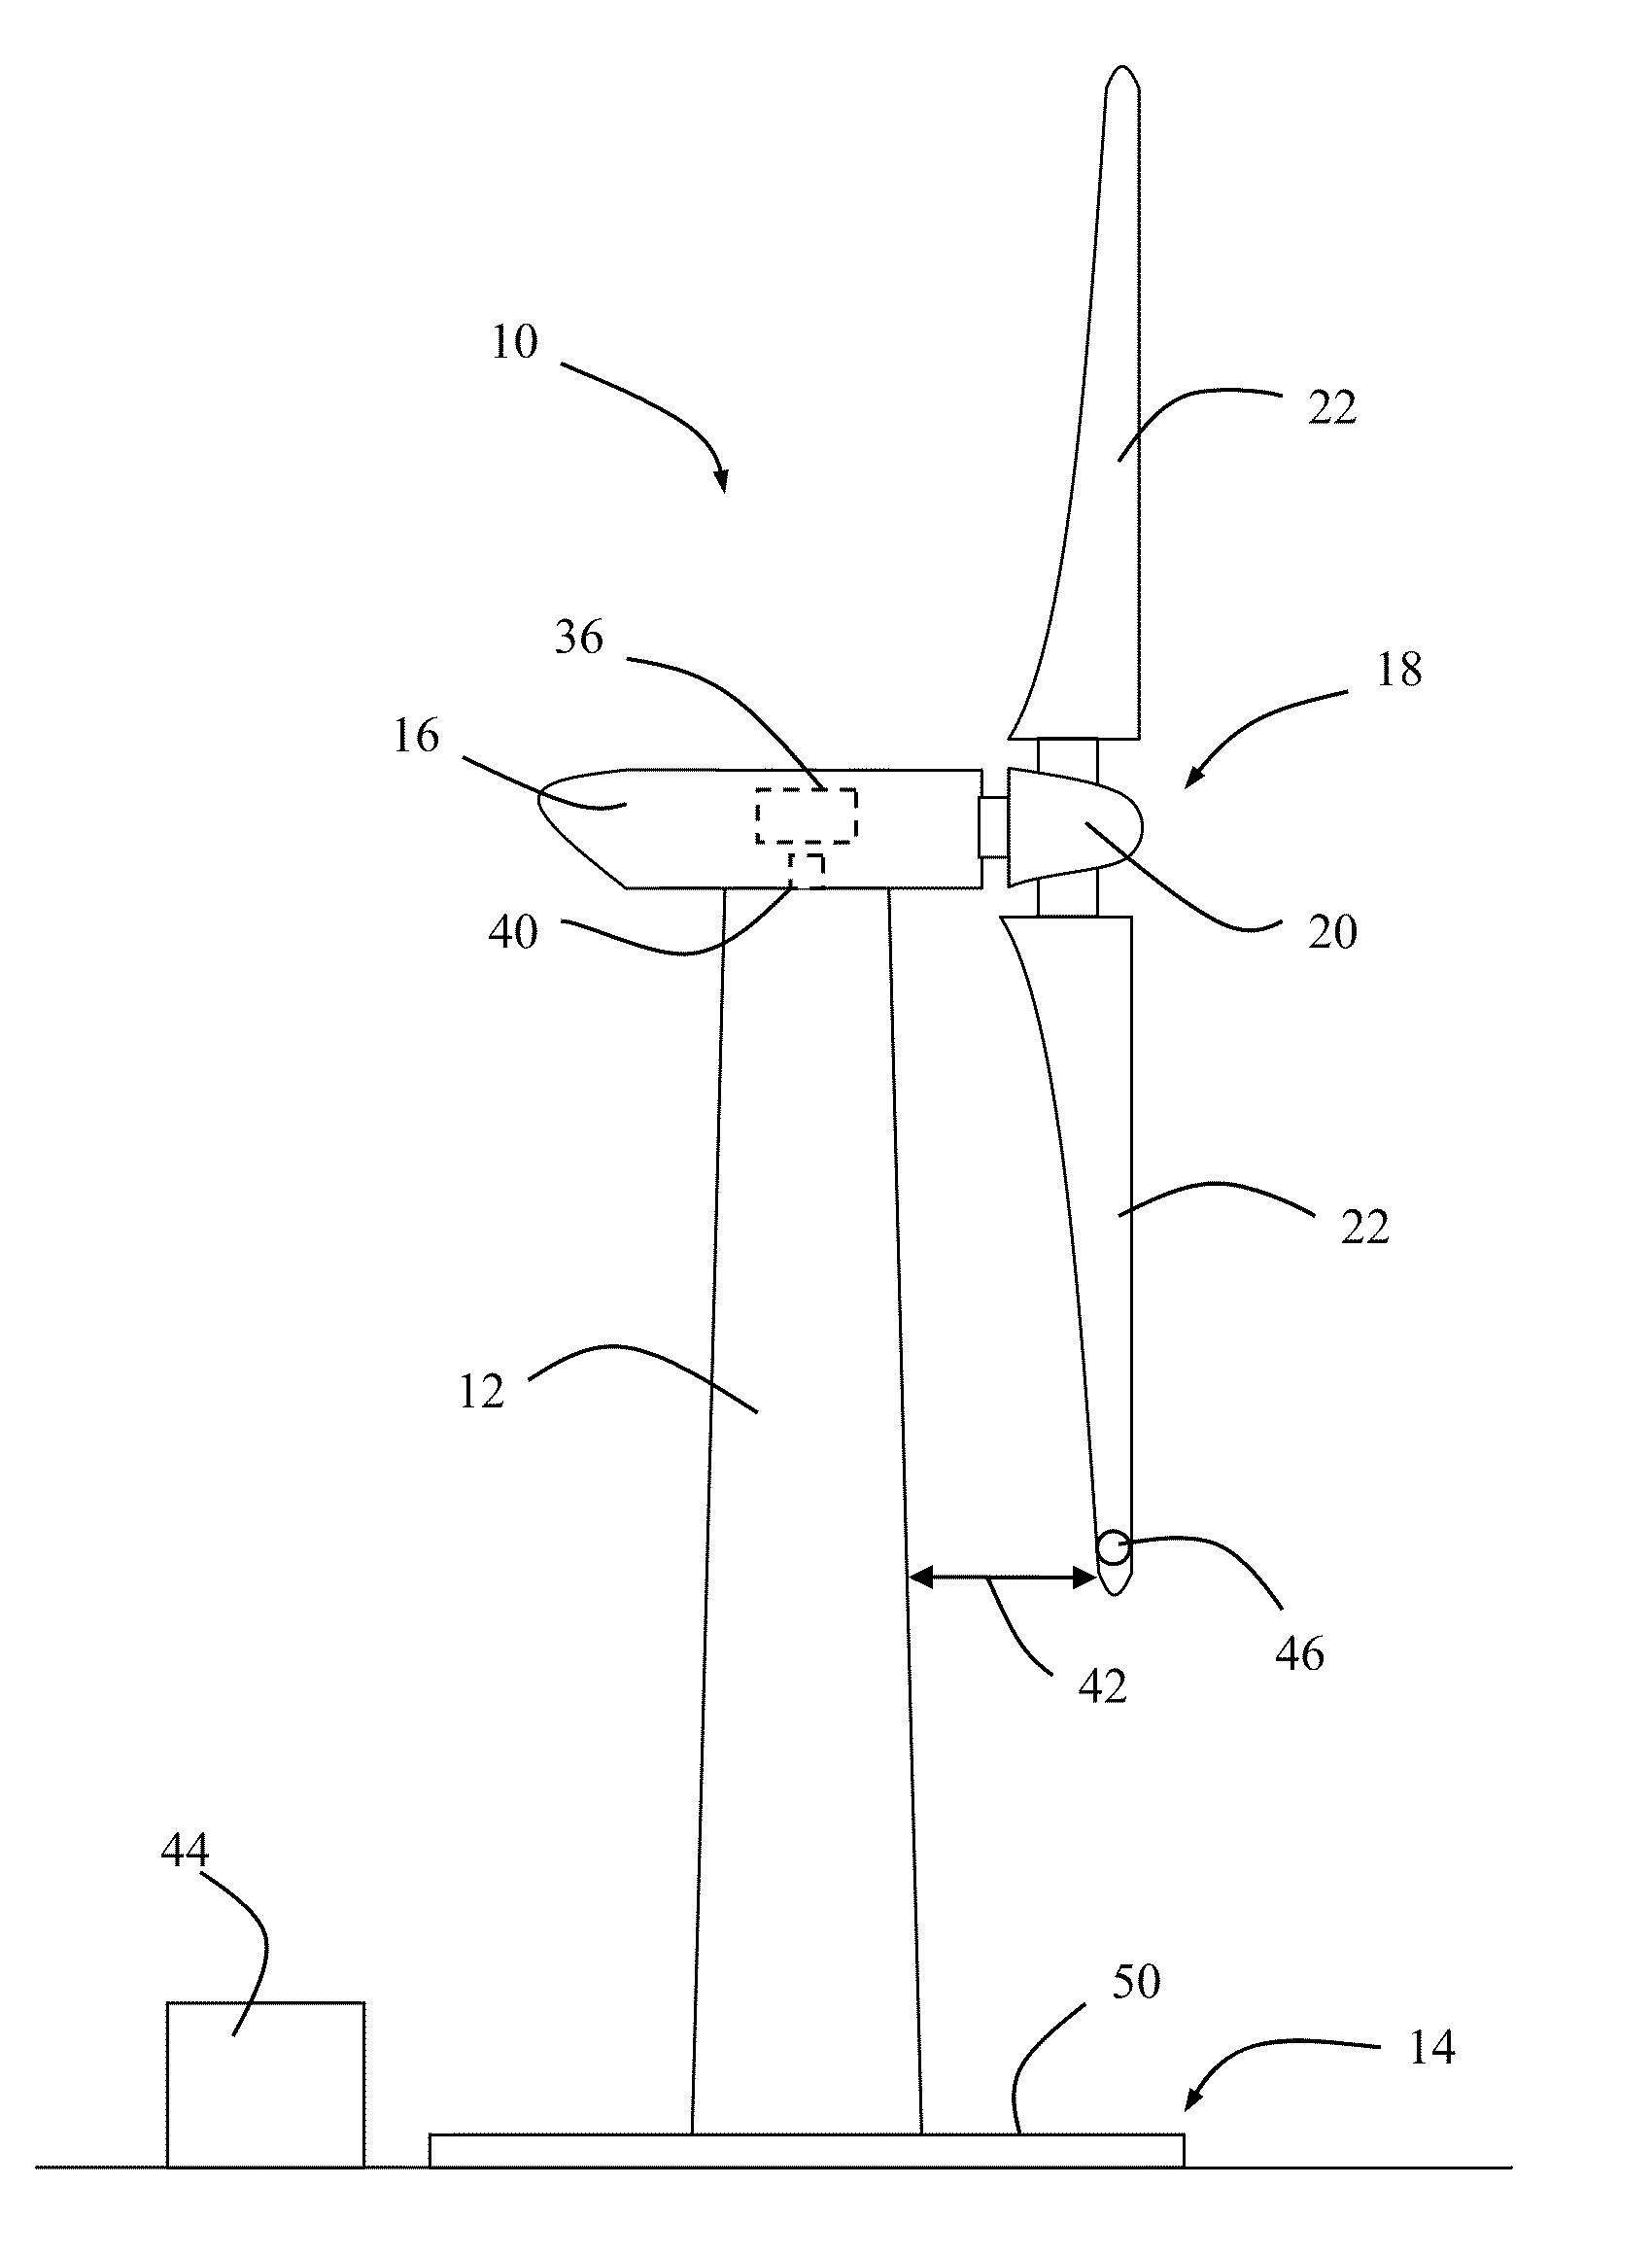 System and method for monitoring and controlling wind turbine blade deflection